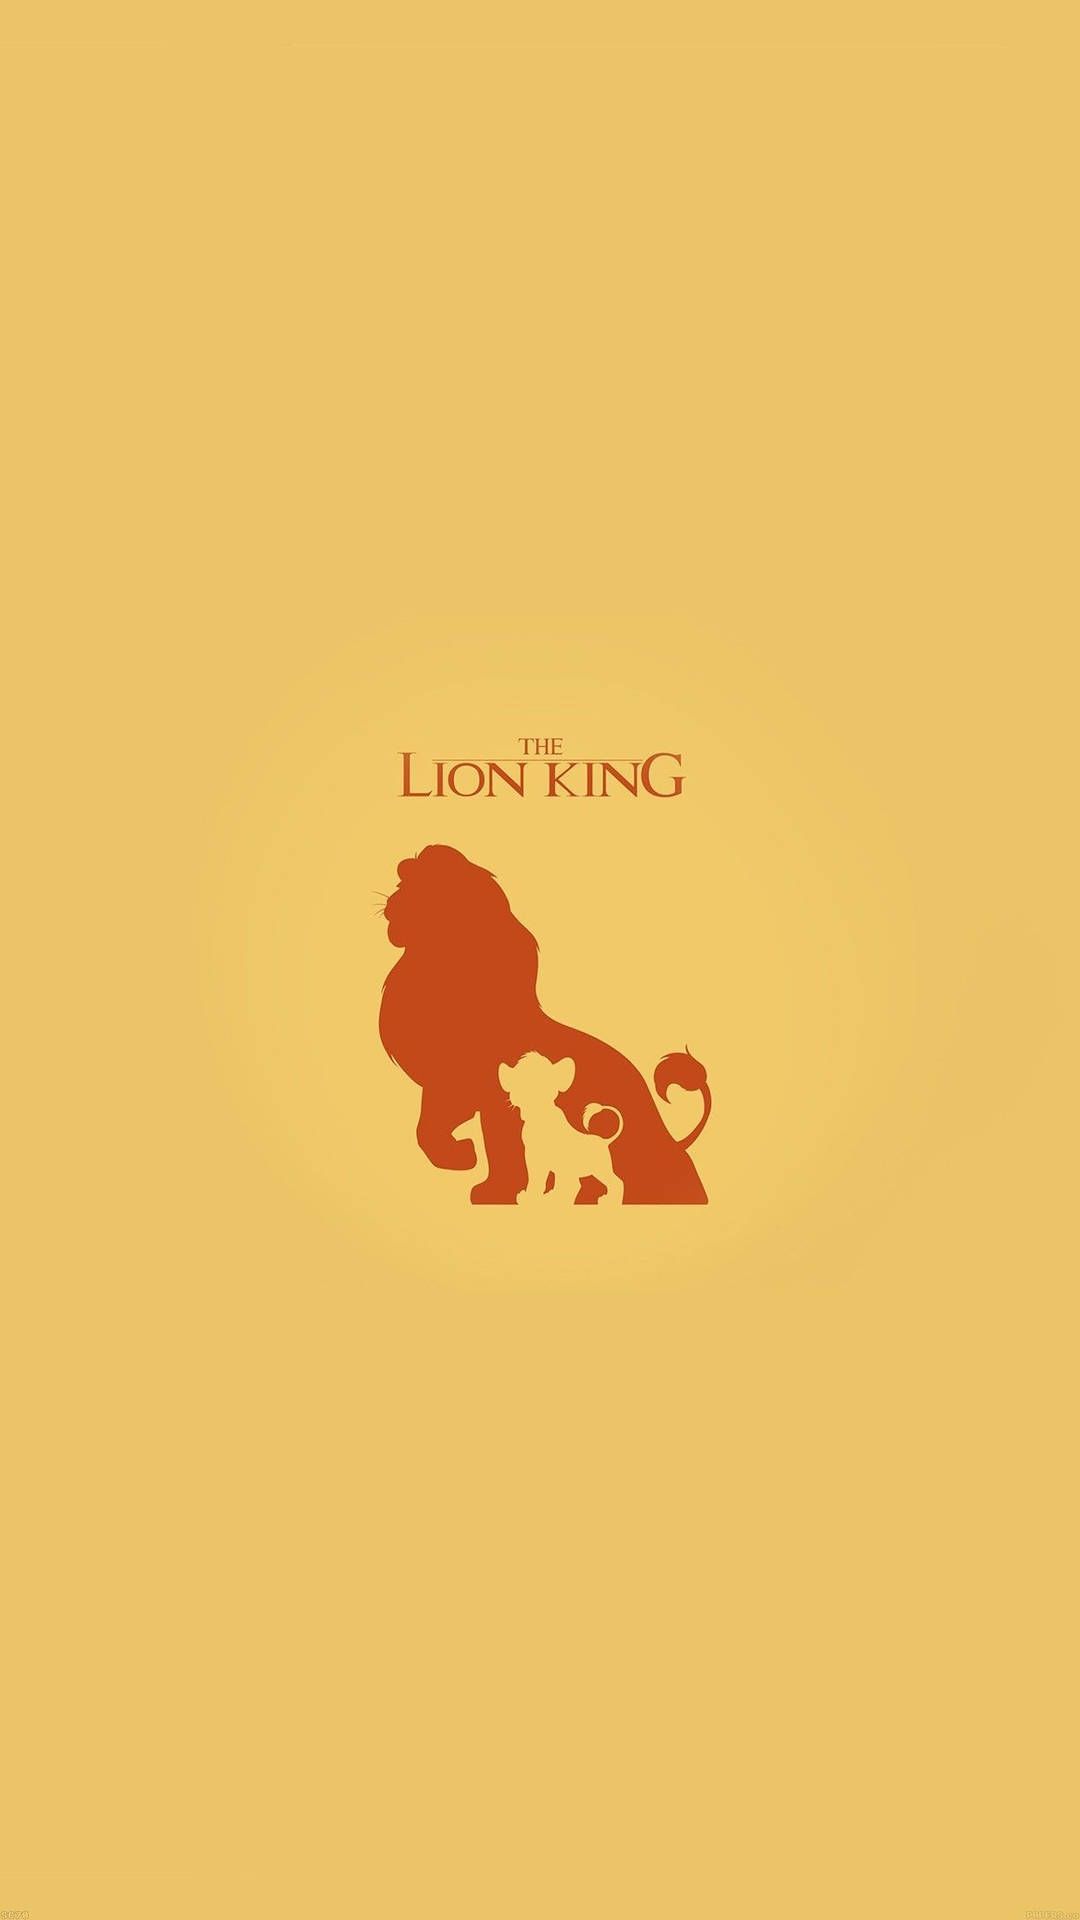 The Lion King iPhone Wallpaper with high-resolution 1080x1920 pixel. You can use this wallpaper for your iPhone 5, 6, 7, 8, X, XS, XR backgrounds, Mobile Screensaver, or iPad Lock Screen - The Lion King